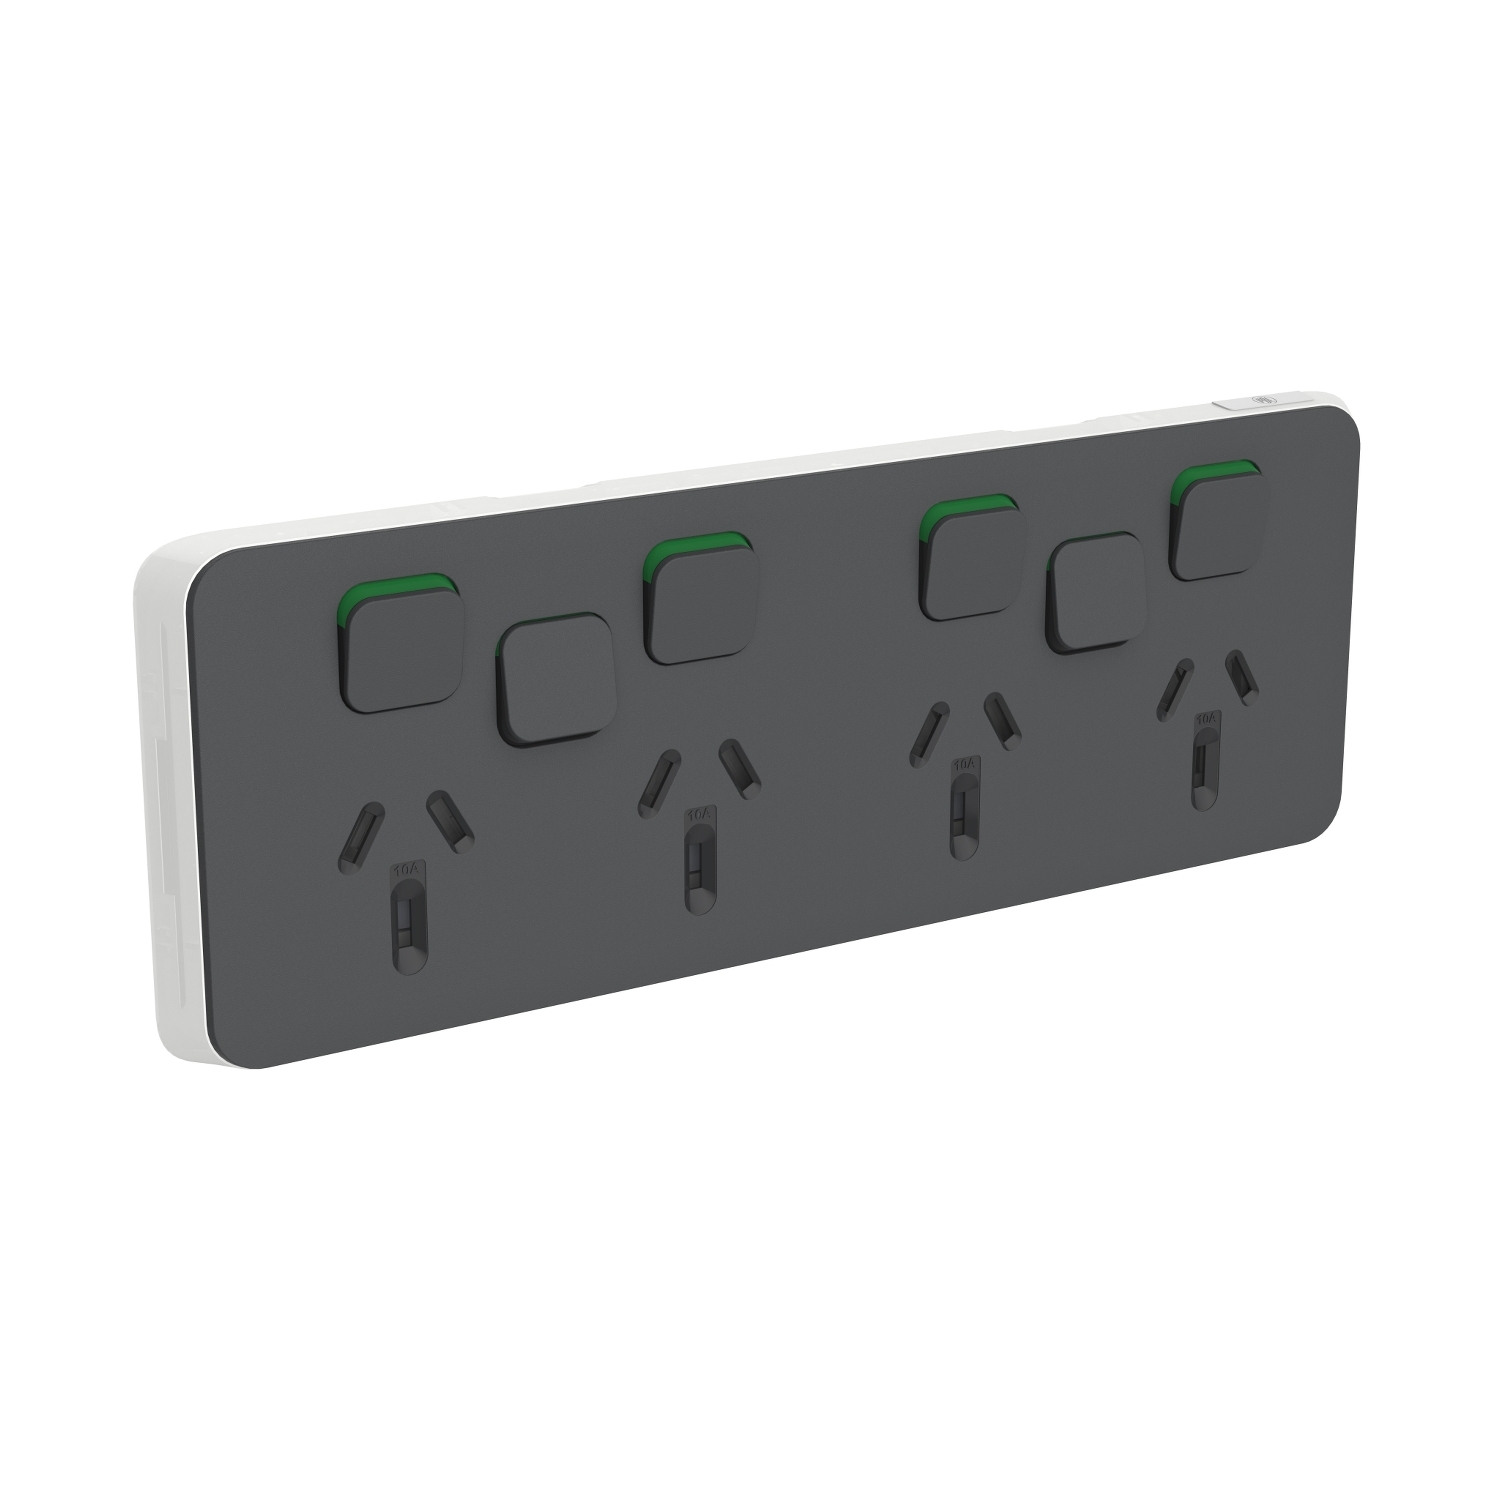 PDL Iconic, cover frame for switched GPO Horiz 10A 250V option for 2 extra switch - Anthracite